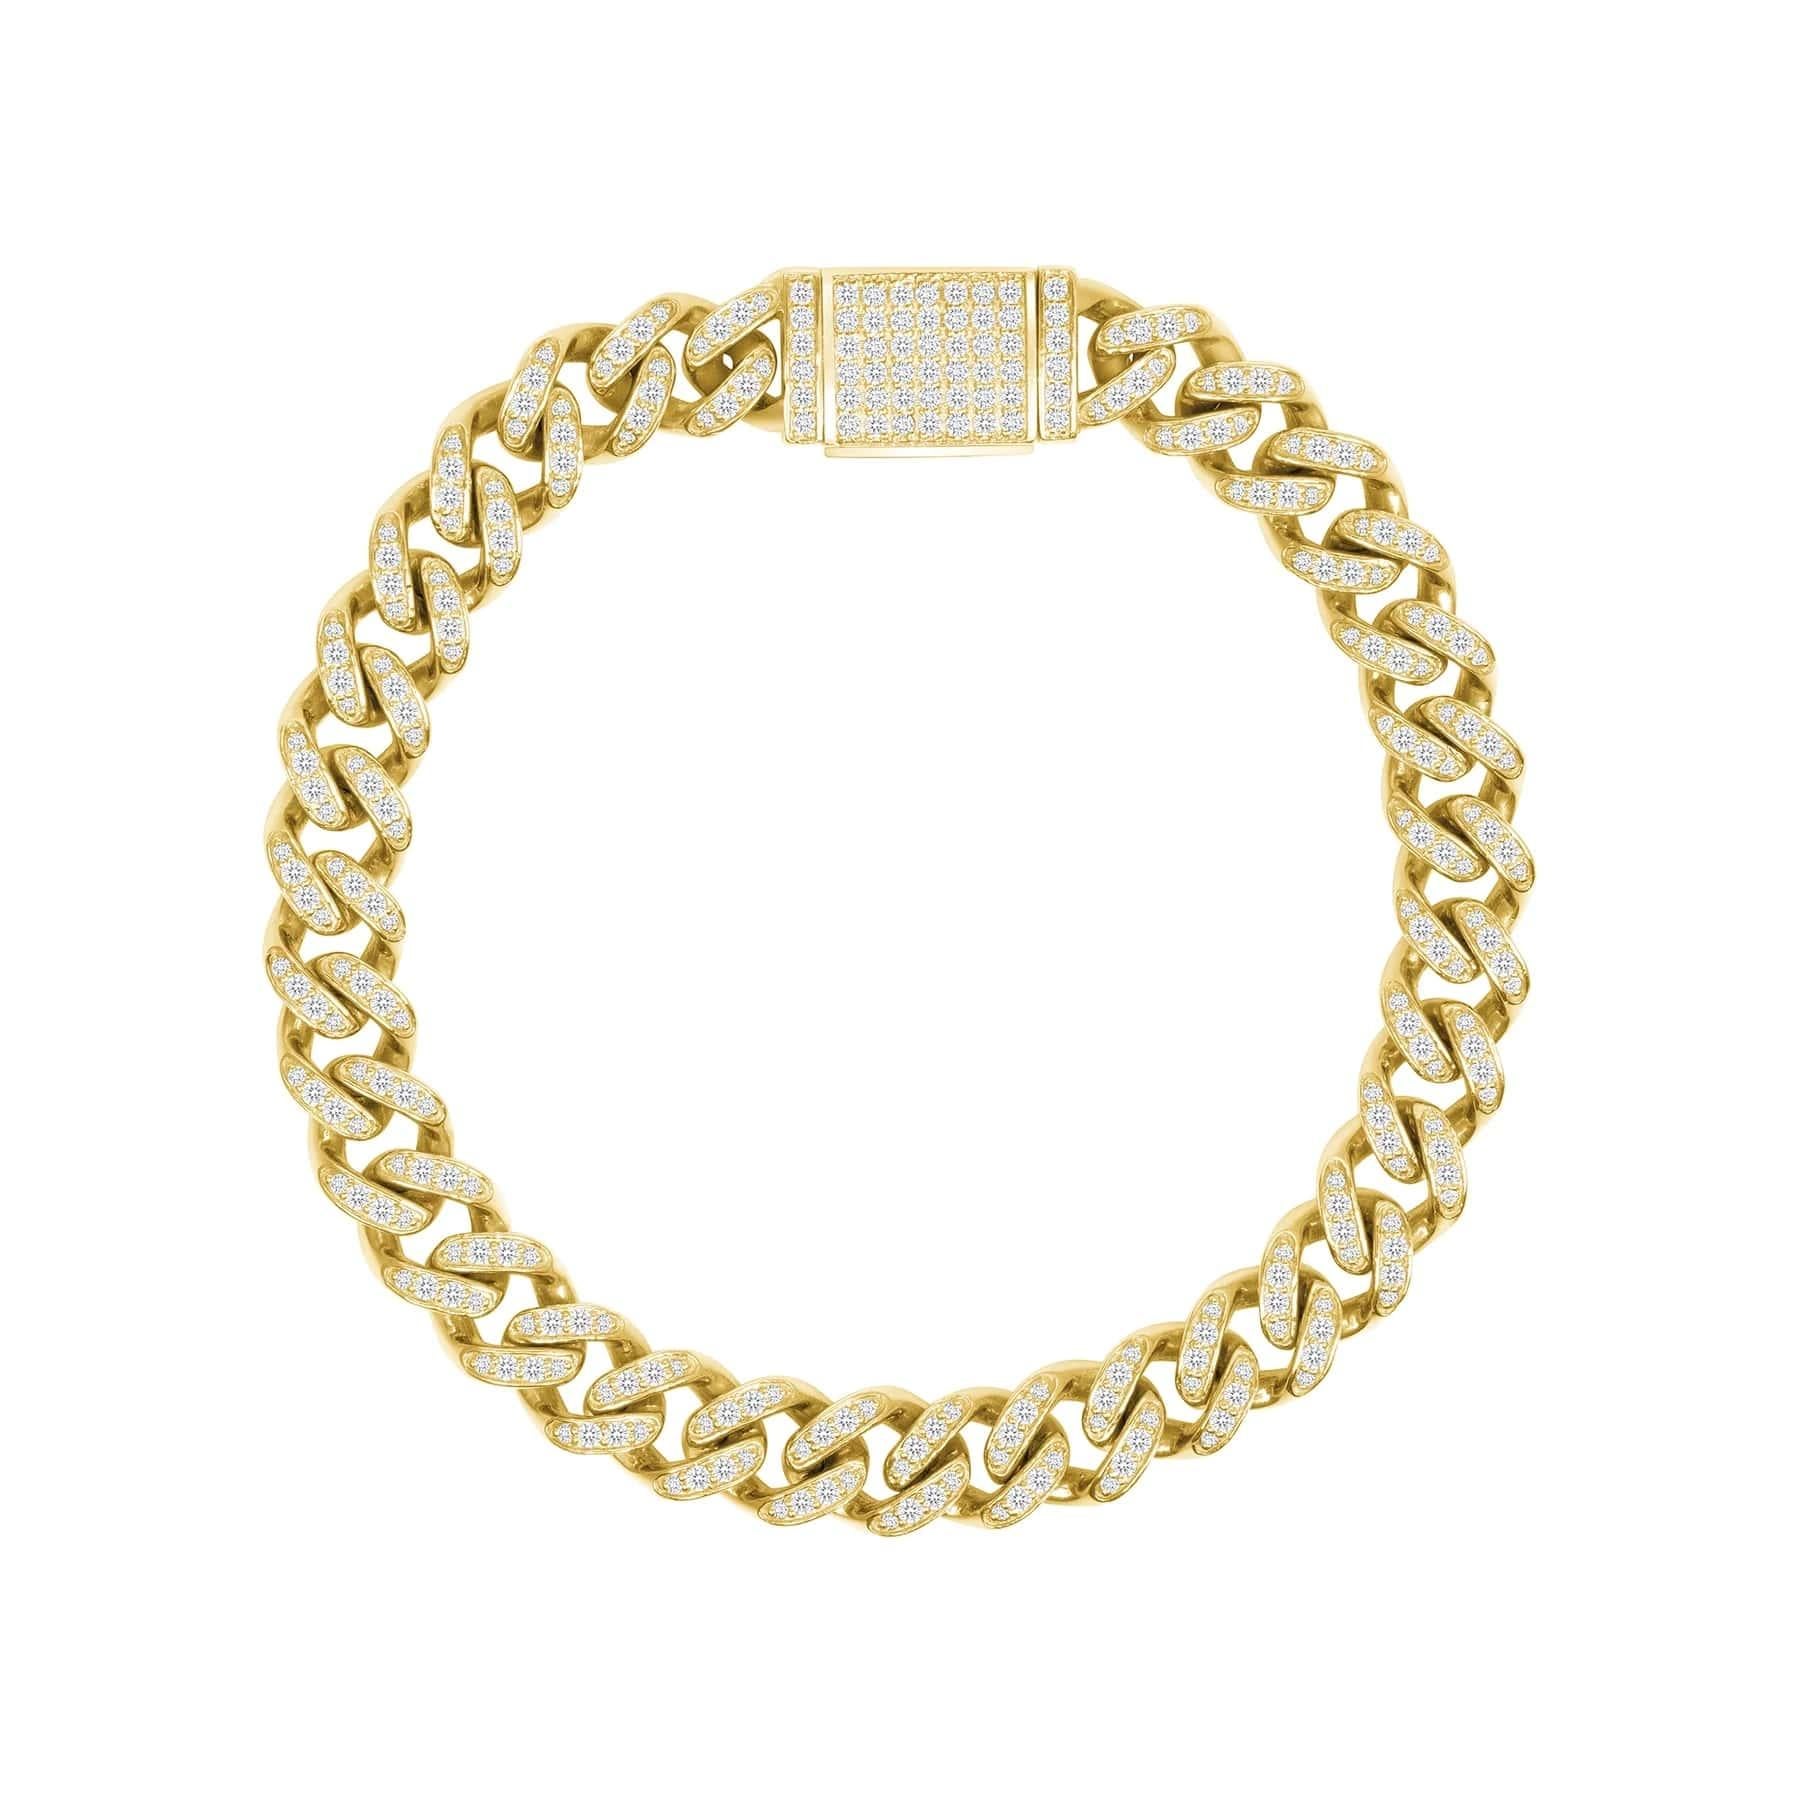 This diamond cuban bracelet compliments any outfit and shines in every setting.
 
Bracelet Information
Metal : 14k Gold
Color : White Gold, Yellow Gold, Rose Gold
Diamond Cut : Round 
Diamond Carats : 2ttcw
Diamond Clarity : VS -SI
Diamond Color :